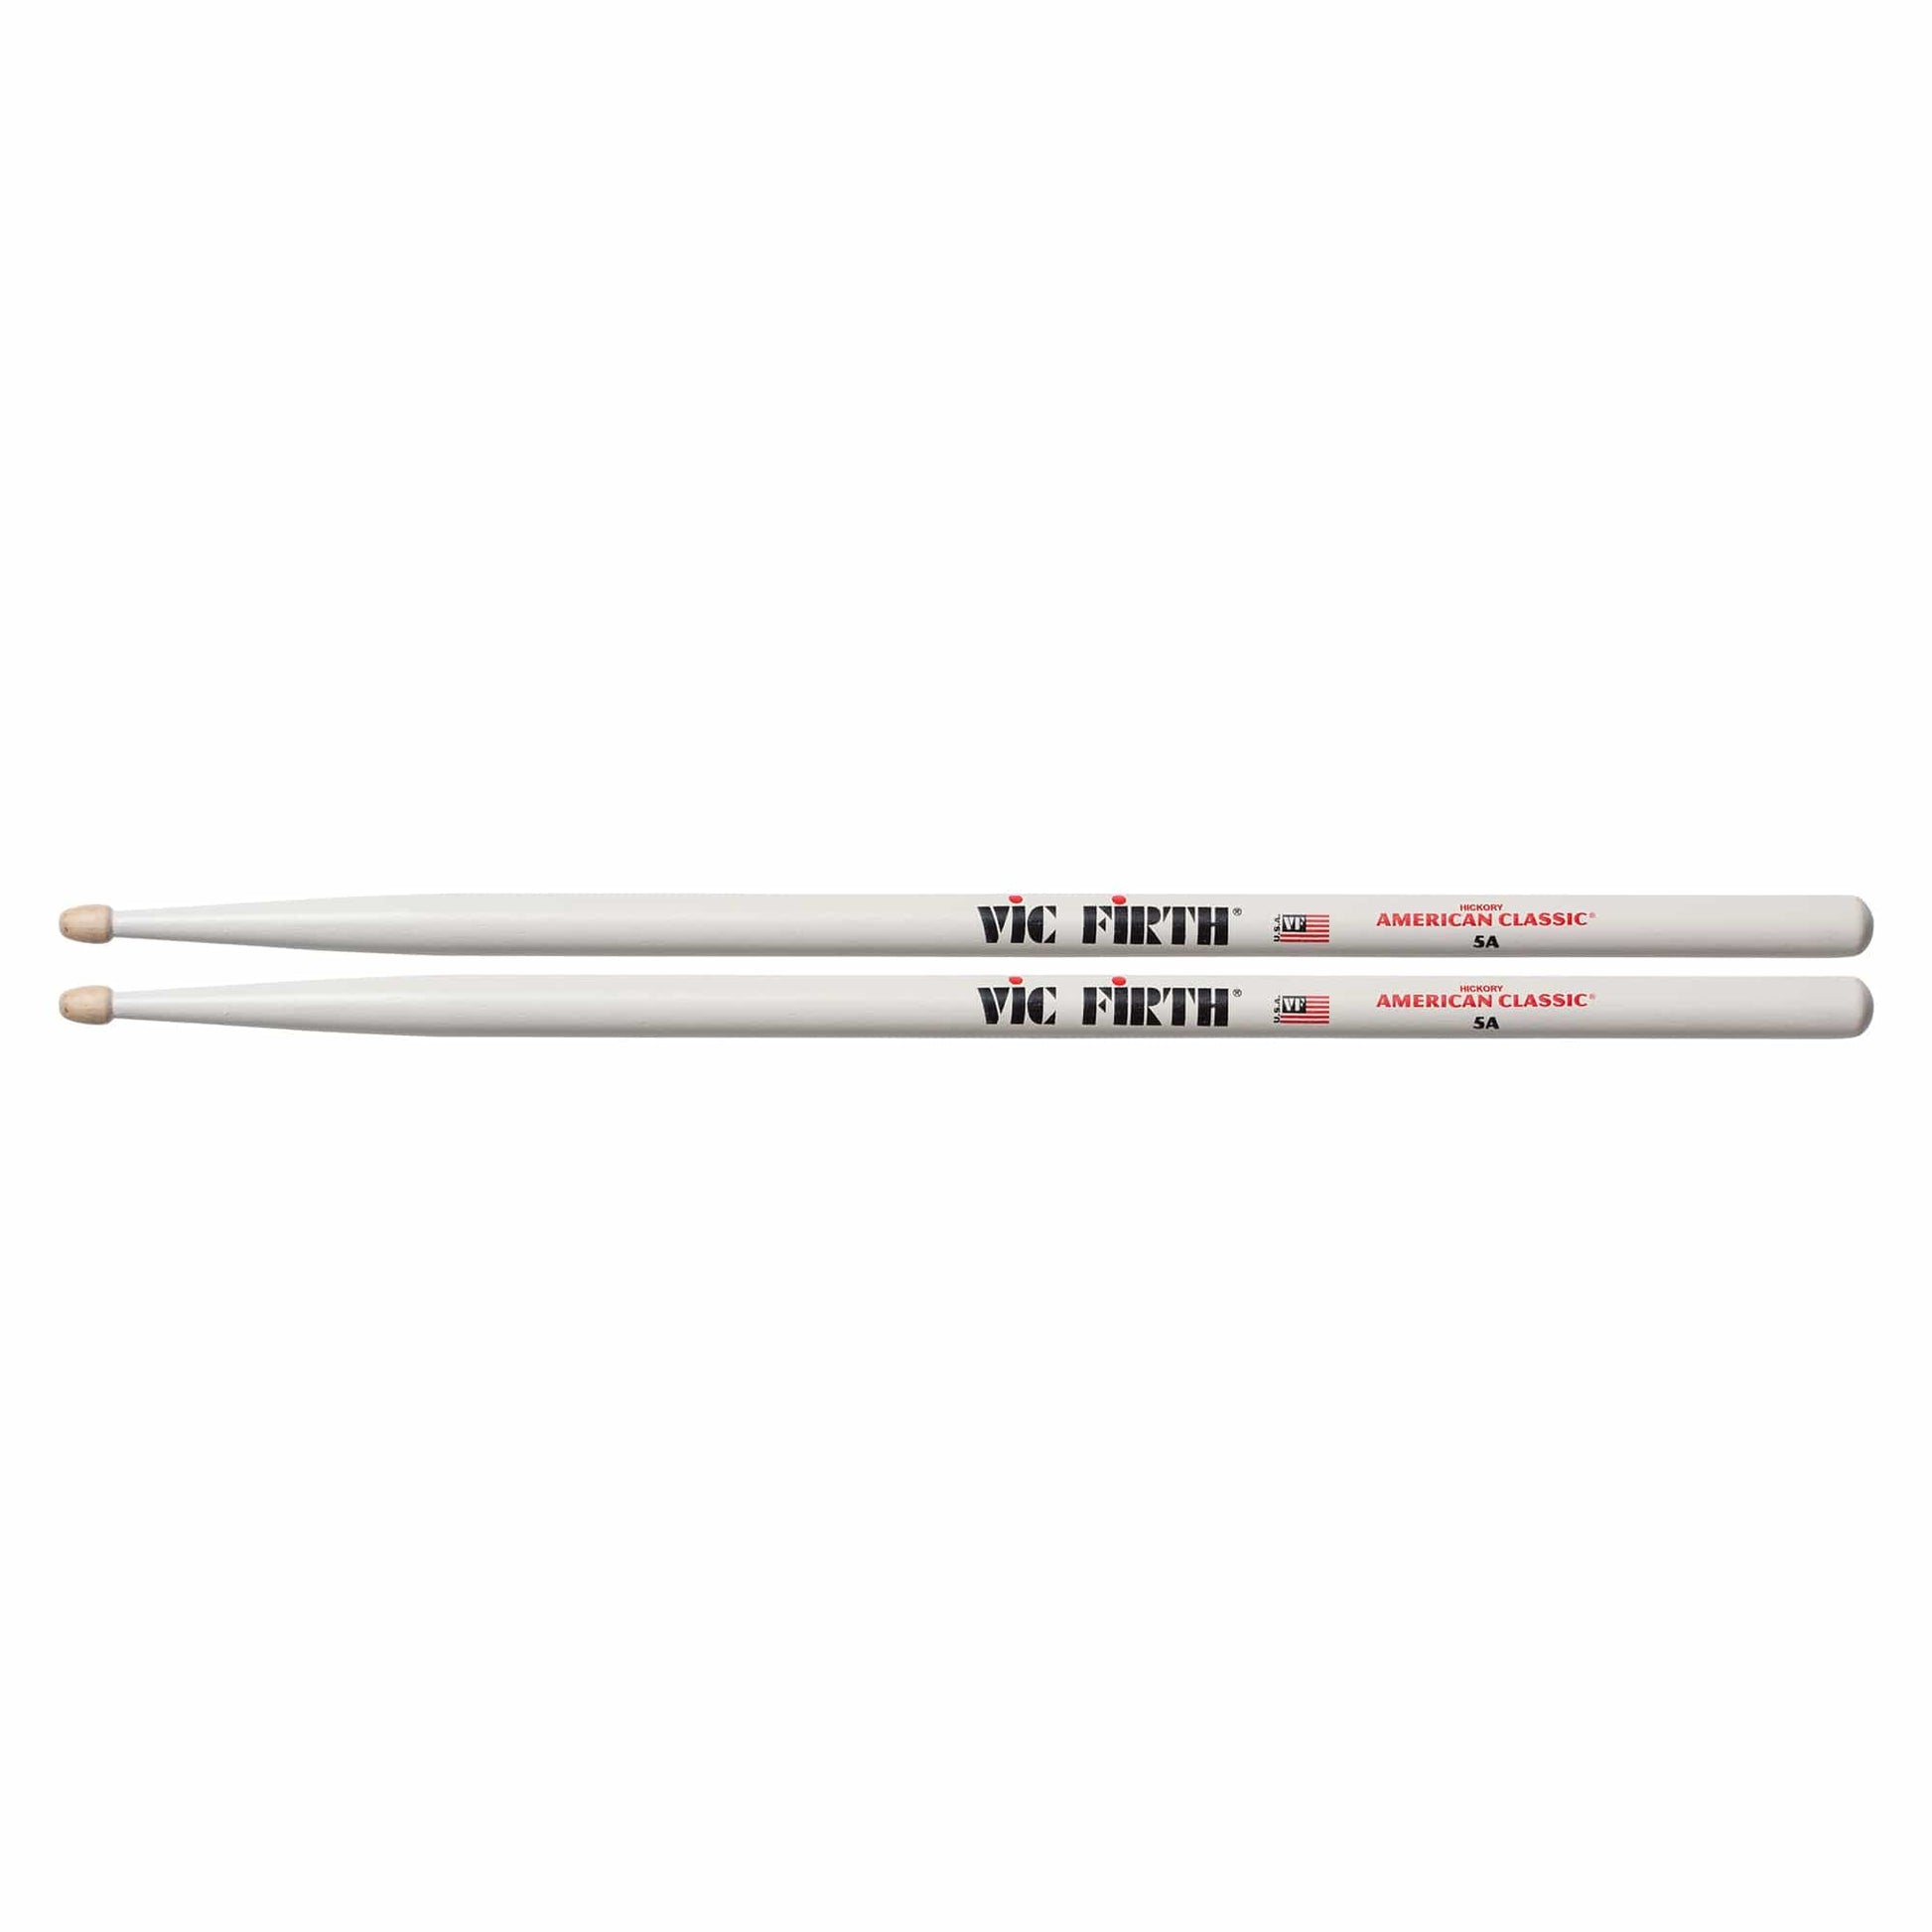 Vic Firth American Classic White 5A Wood Tip Drum Sticks Drums and Percussion / Parts and Accessories / Drum Sticks and Mallets